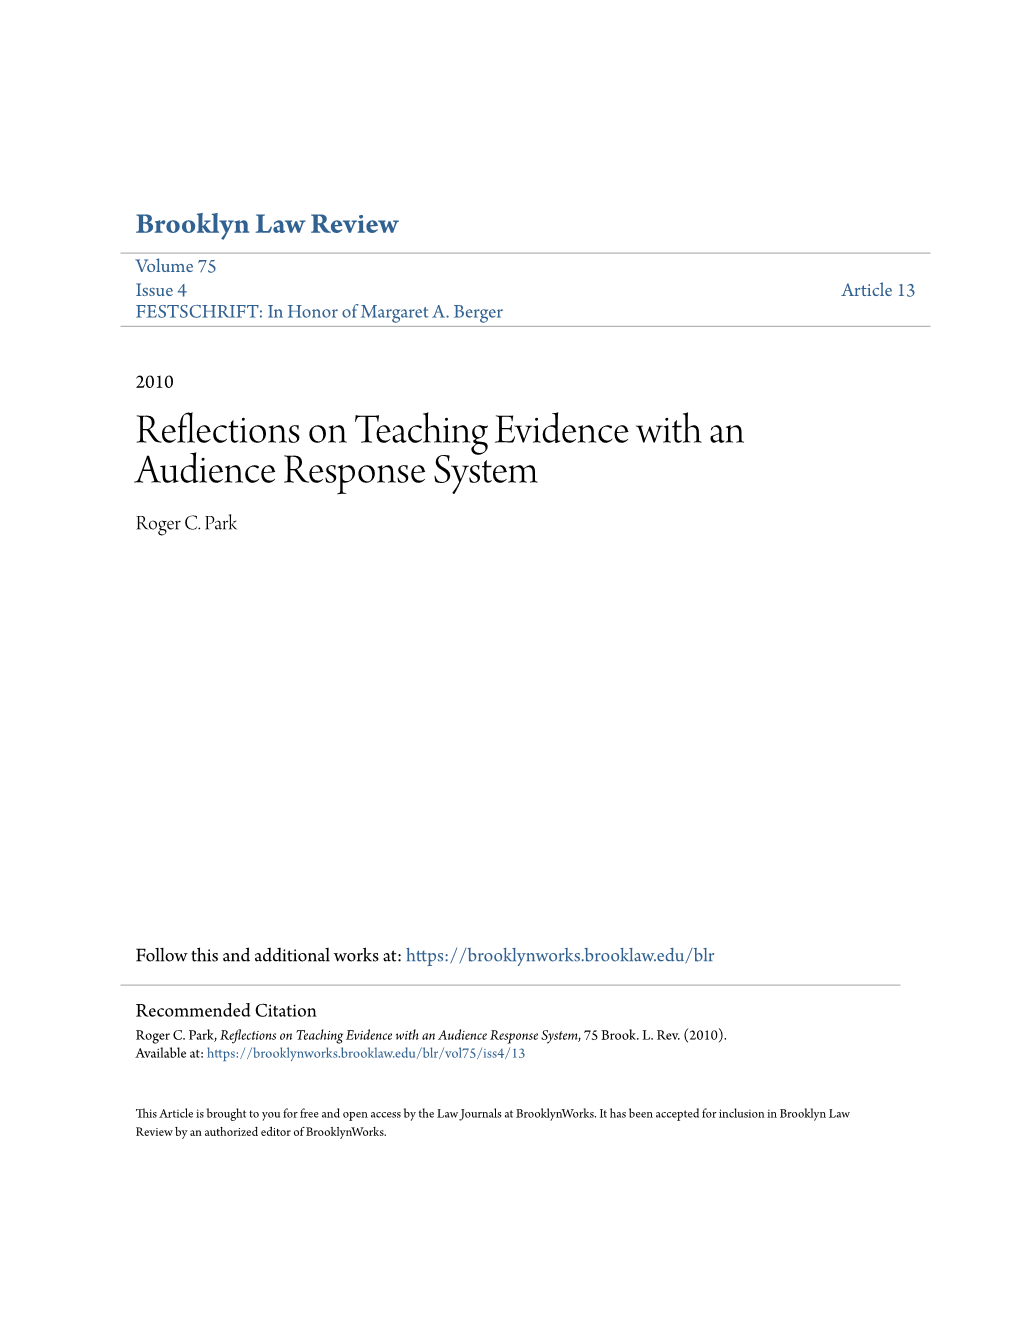 Reflections on Teaching Evidence with an Audience Response System Roger C